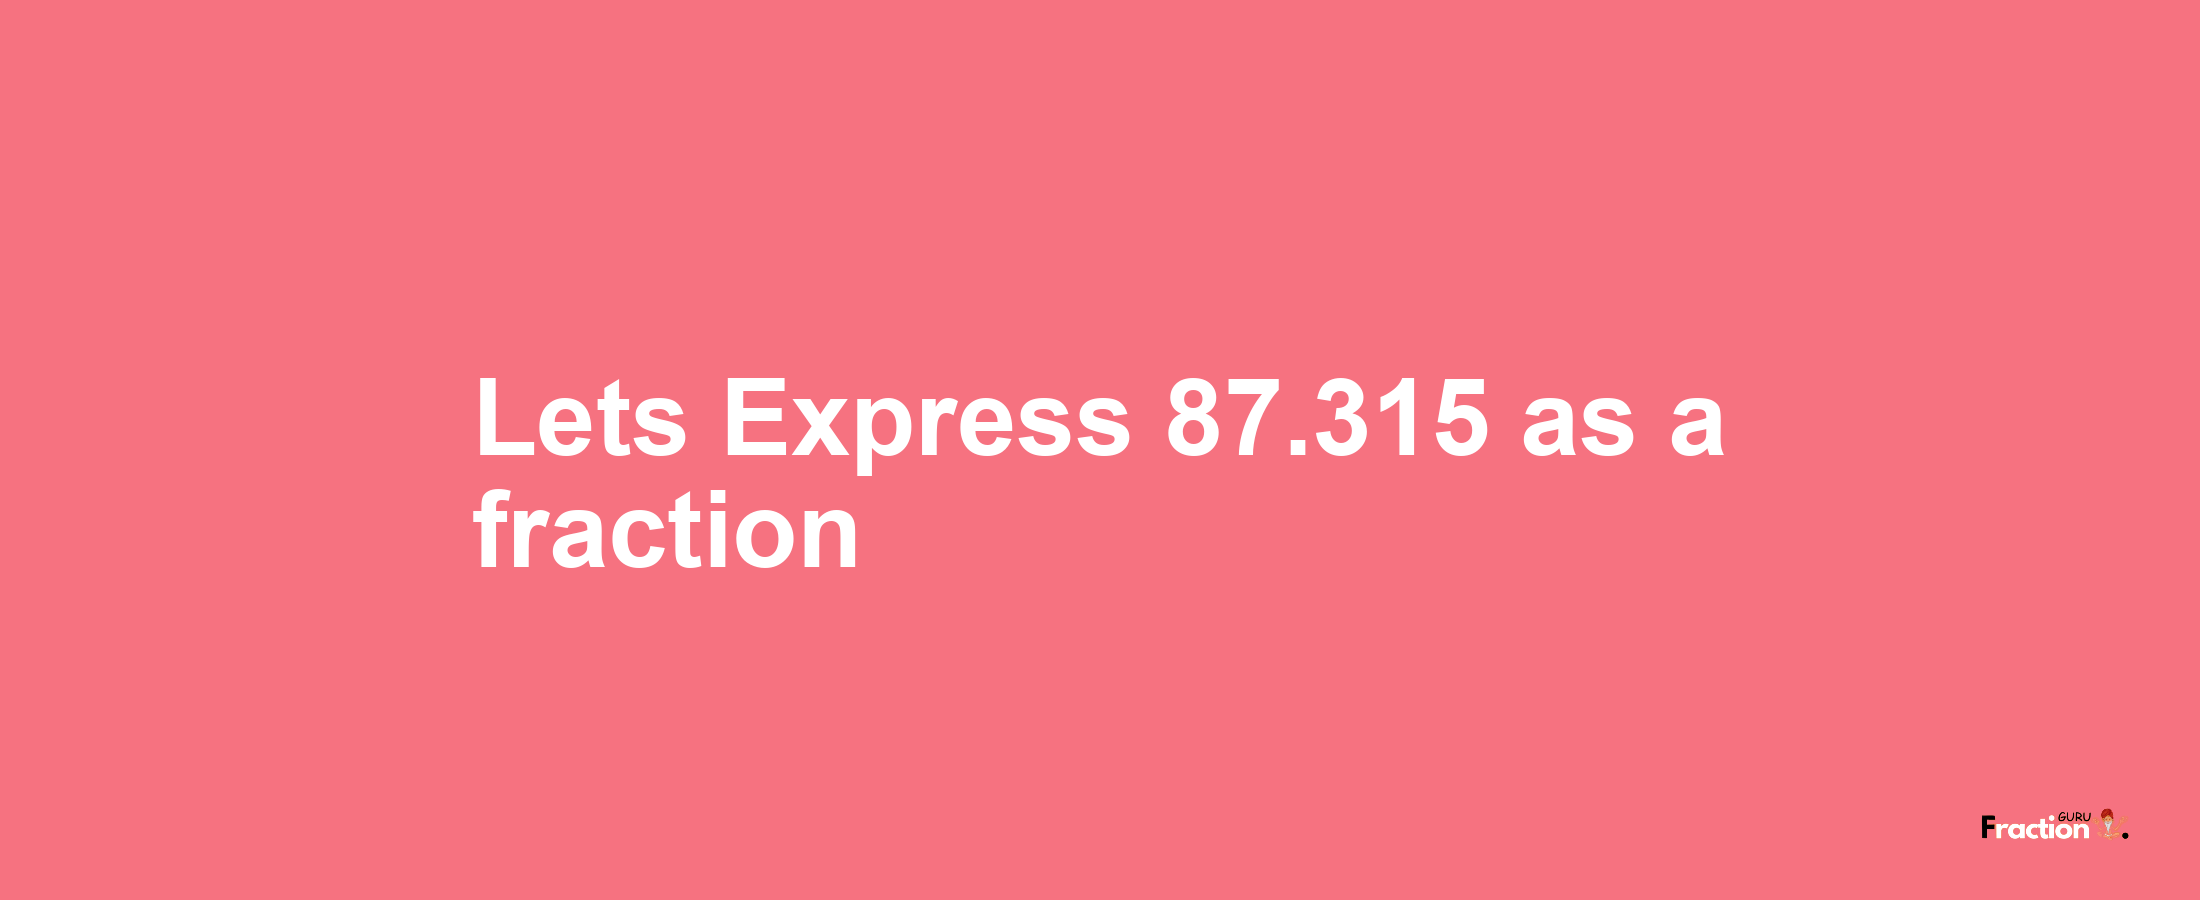 Lets Express 87.315 as afraction